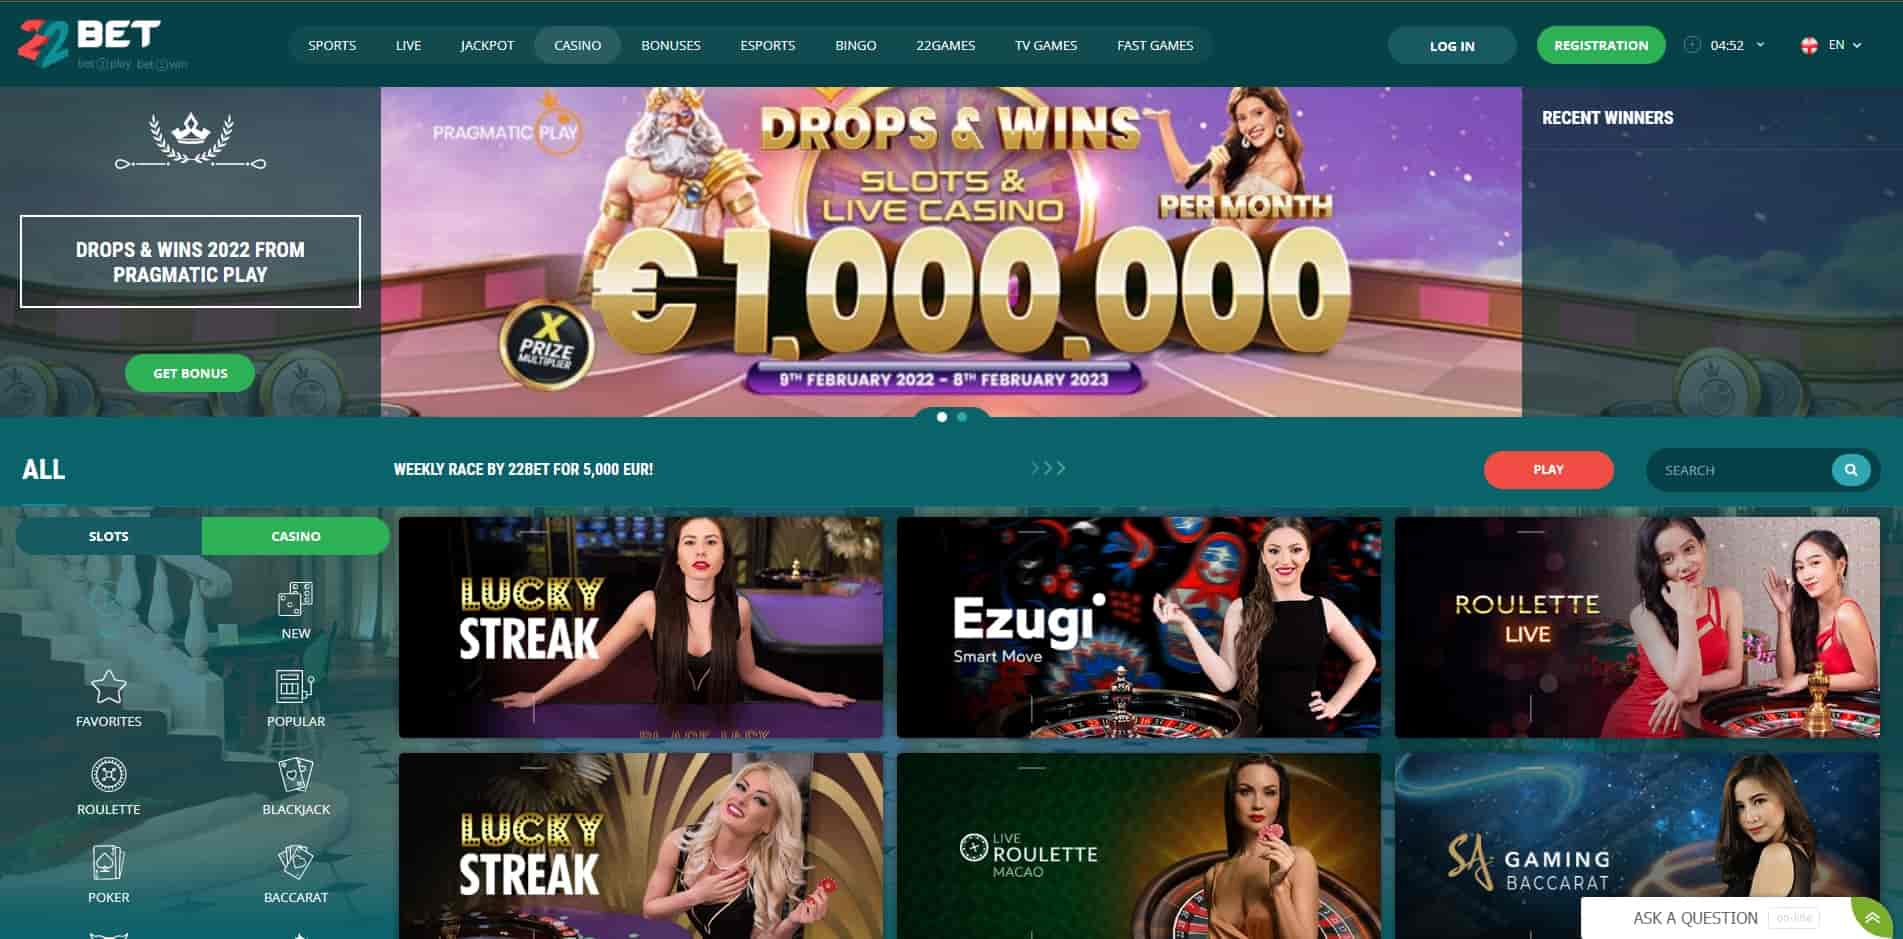 22BET-Avalable-Games-Live-Casino